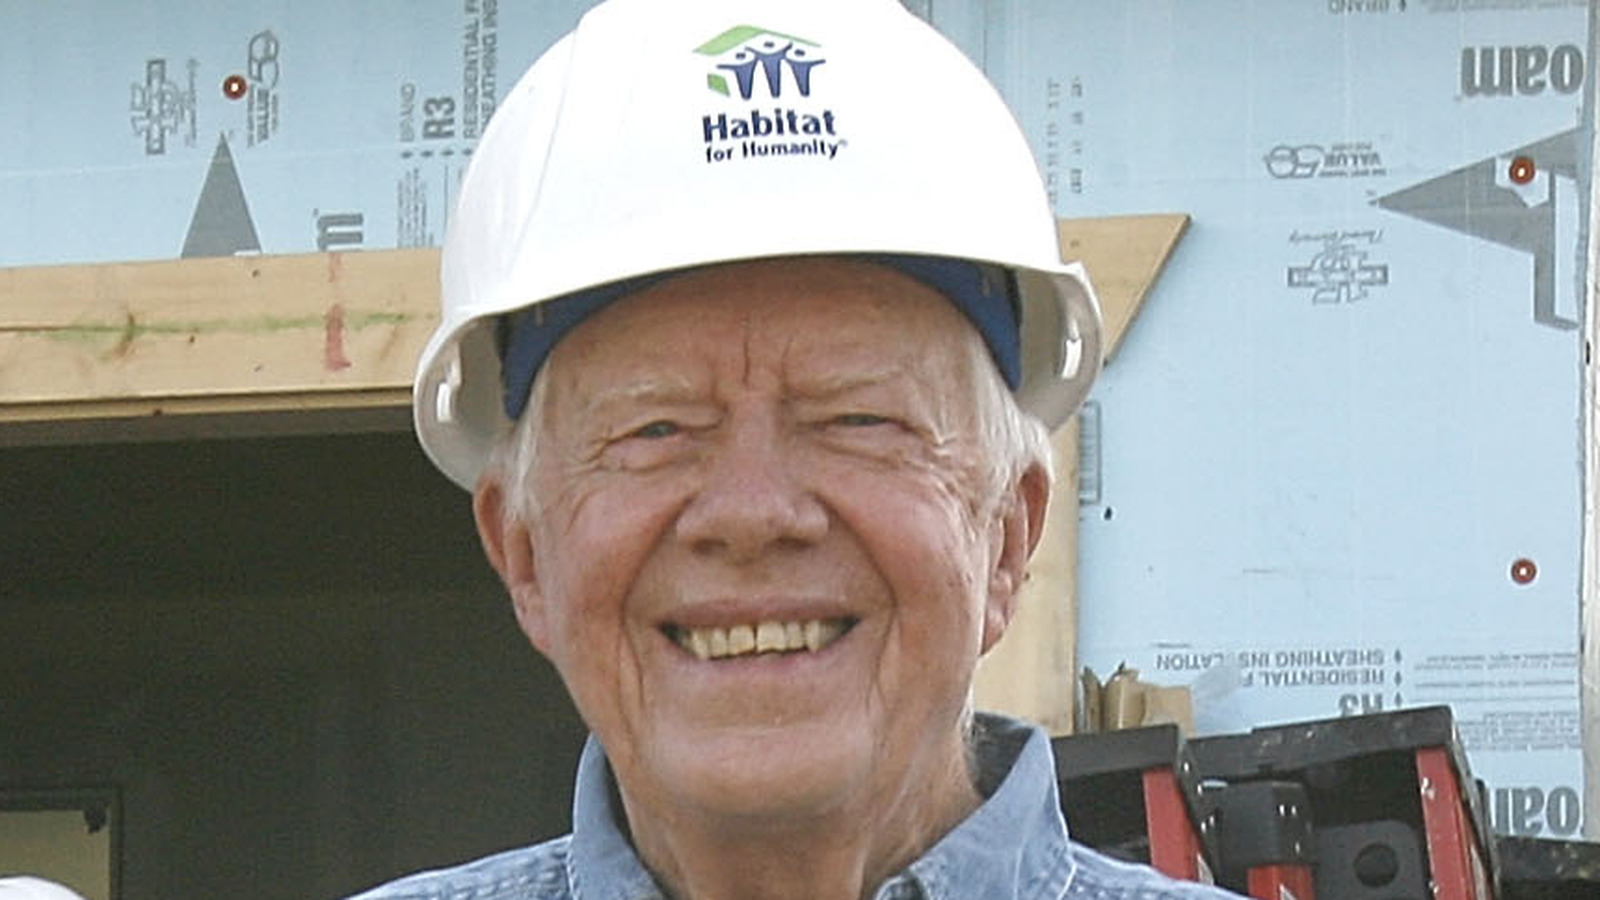 How Jimmy Carter Dedicated His Life To Habitat For Humanity